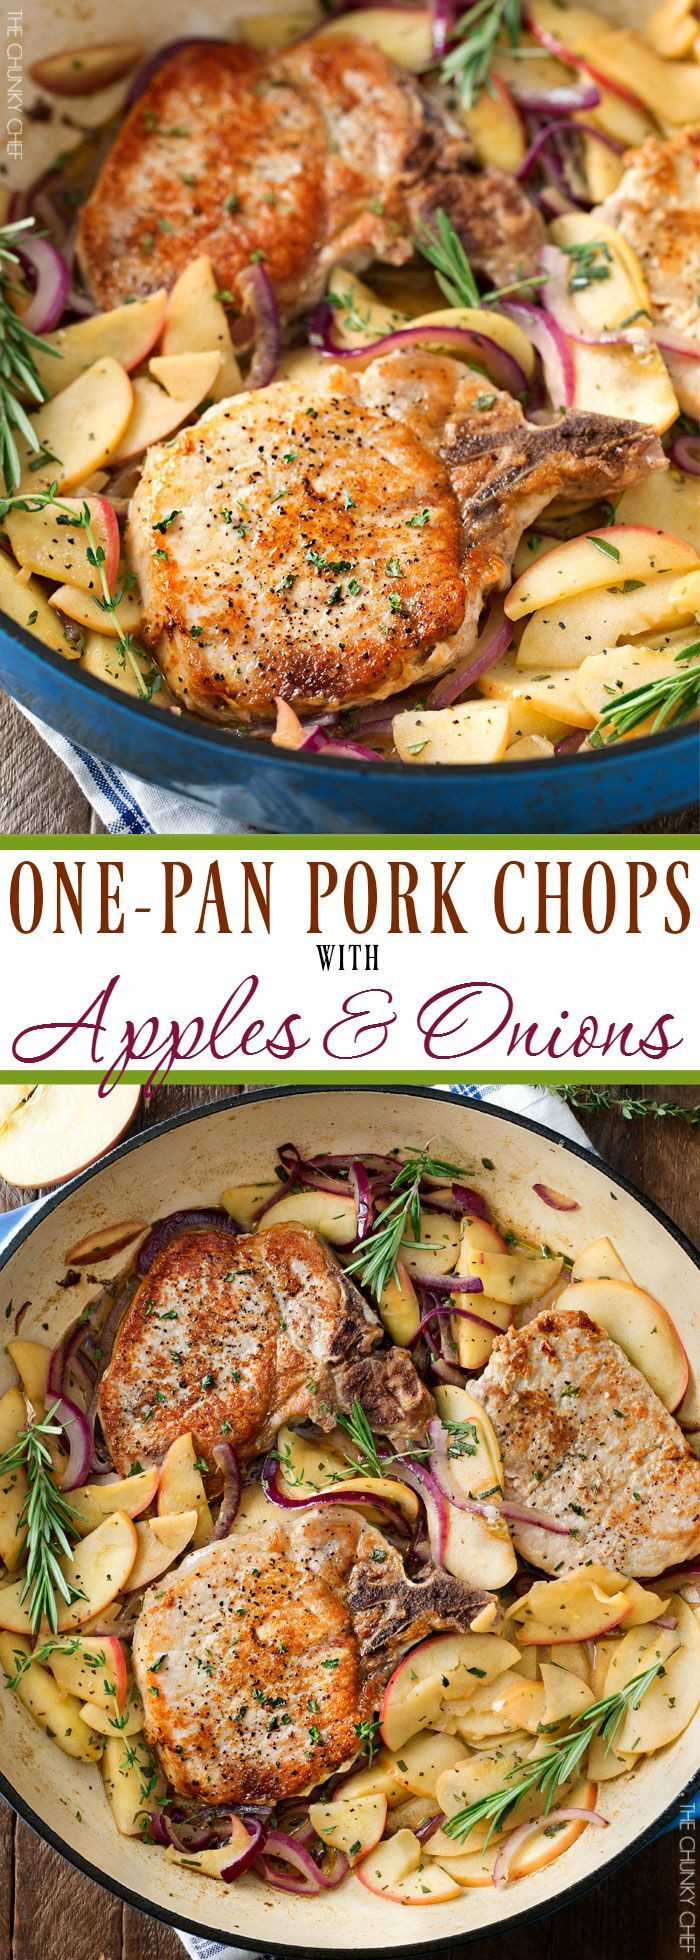 Pork Chops Healthy
 The Best Heart Healthy Pork Chop Recipes Best Diet and